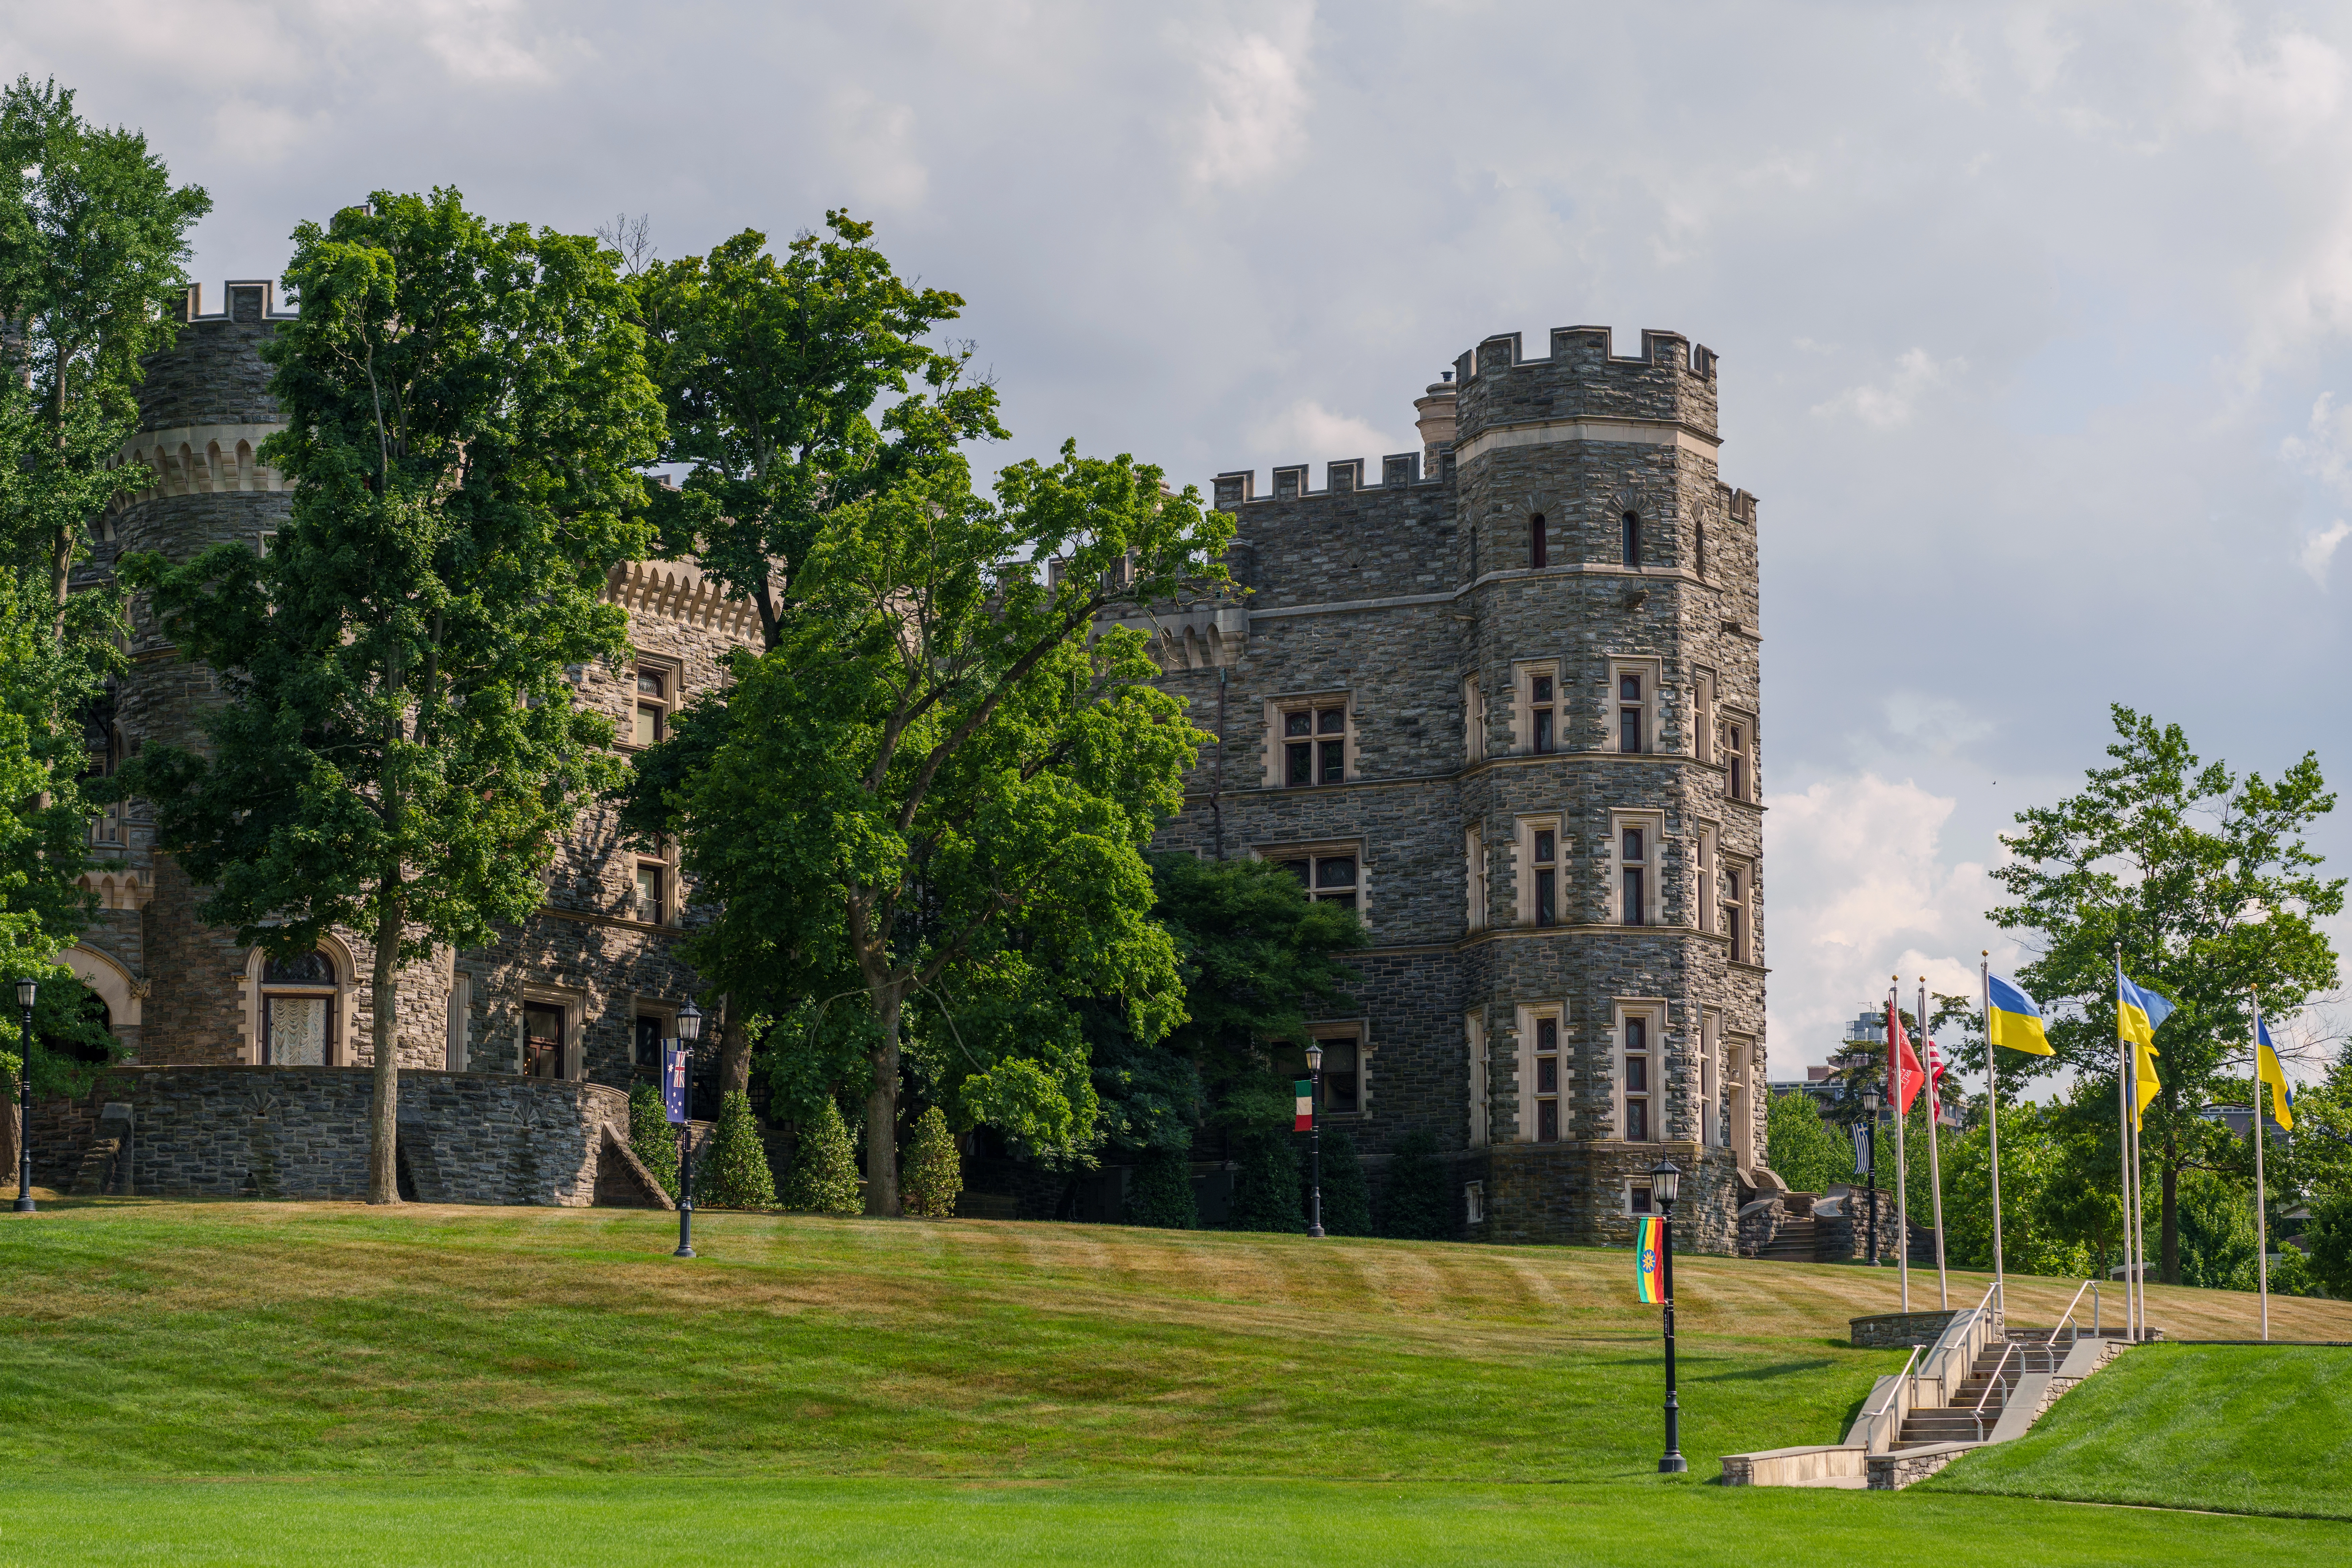 A sideview of Grey Towers with trees and flags in the surrounding